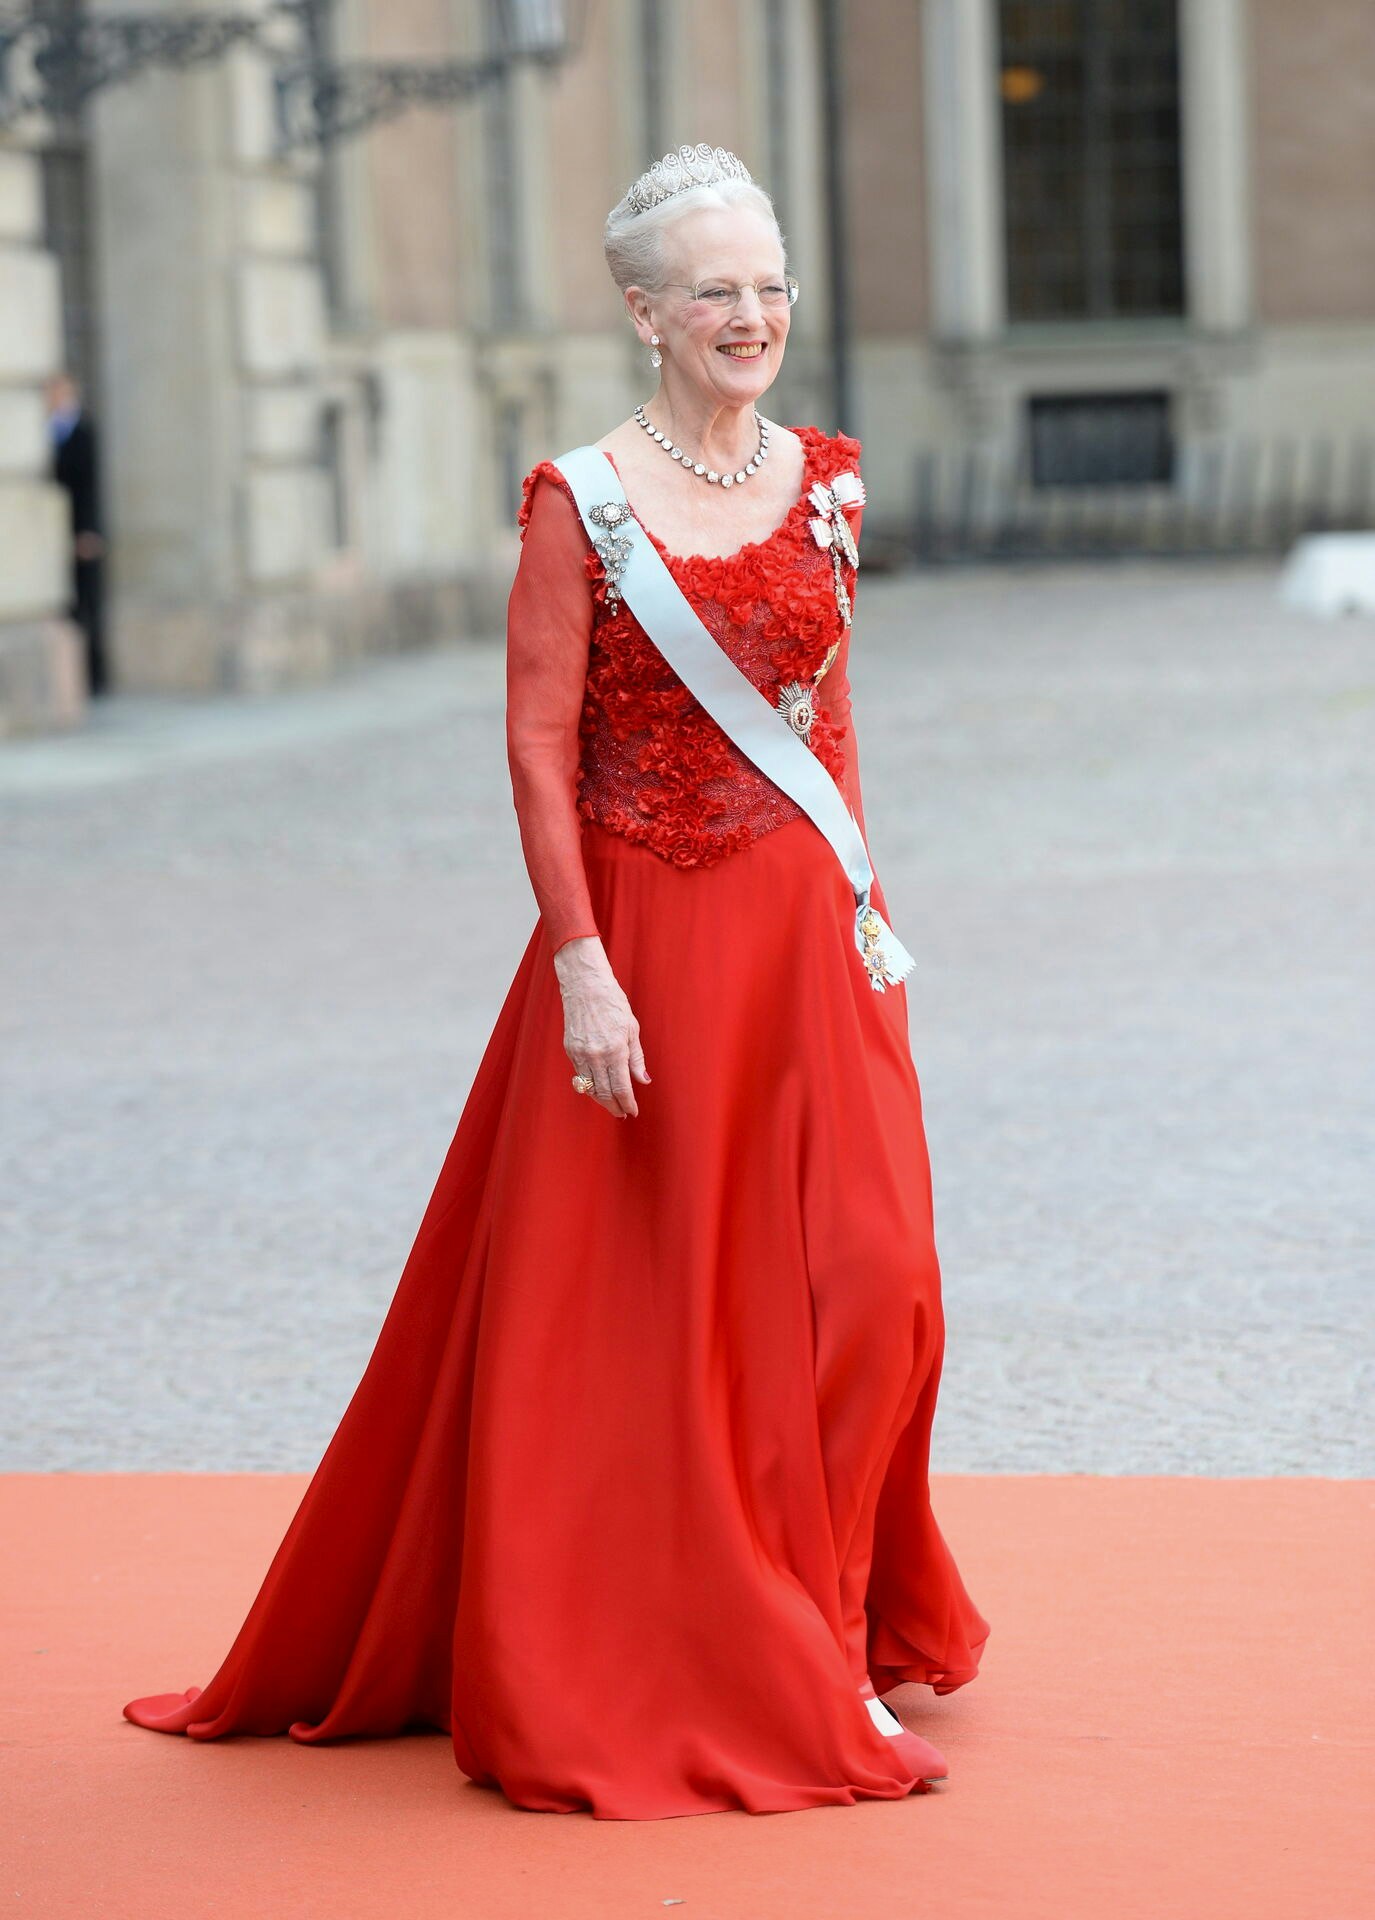 Queen Margrethe of Denmark arrives to the wedding of Sweden's Prince Carl Philip and Sofia Hellqvist at the Royal Chapel in Stockholm, Sweden, June 13, 2015. REUTERS/Fredrik Sandberg/TT News Agency ATTENTION EDITORS - THIS IMAGE HAS BEEN SUPPLIED BY A THIRD PARTY. IT IS DISTRIBUTED, EXACTLY AS RECEIVED BY REUTERS, AS A SERVICE TO CLIENTS. SWEDEN OUT.NO COMMERCIAL OR EDITORIAL SALES IN SWEDEN.NO COMMERCIAL SALES.